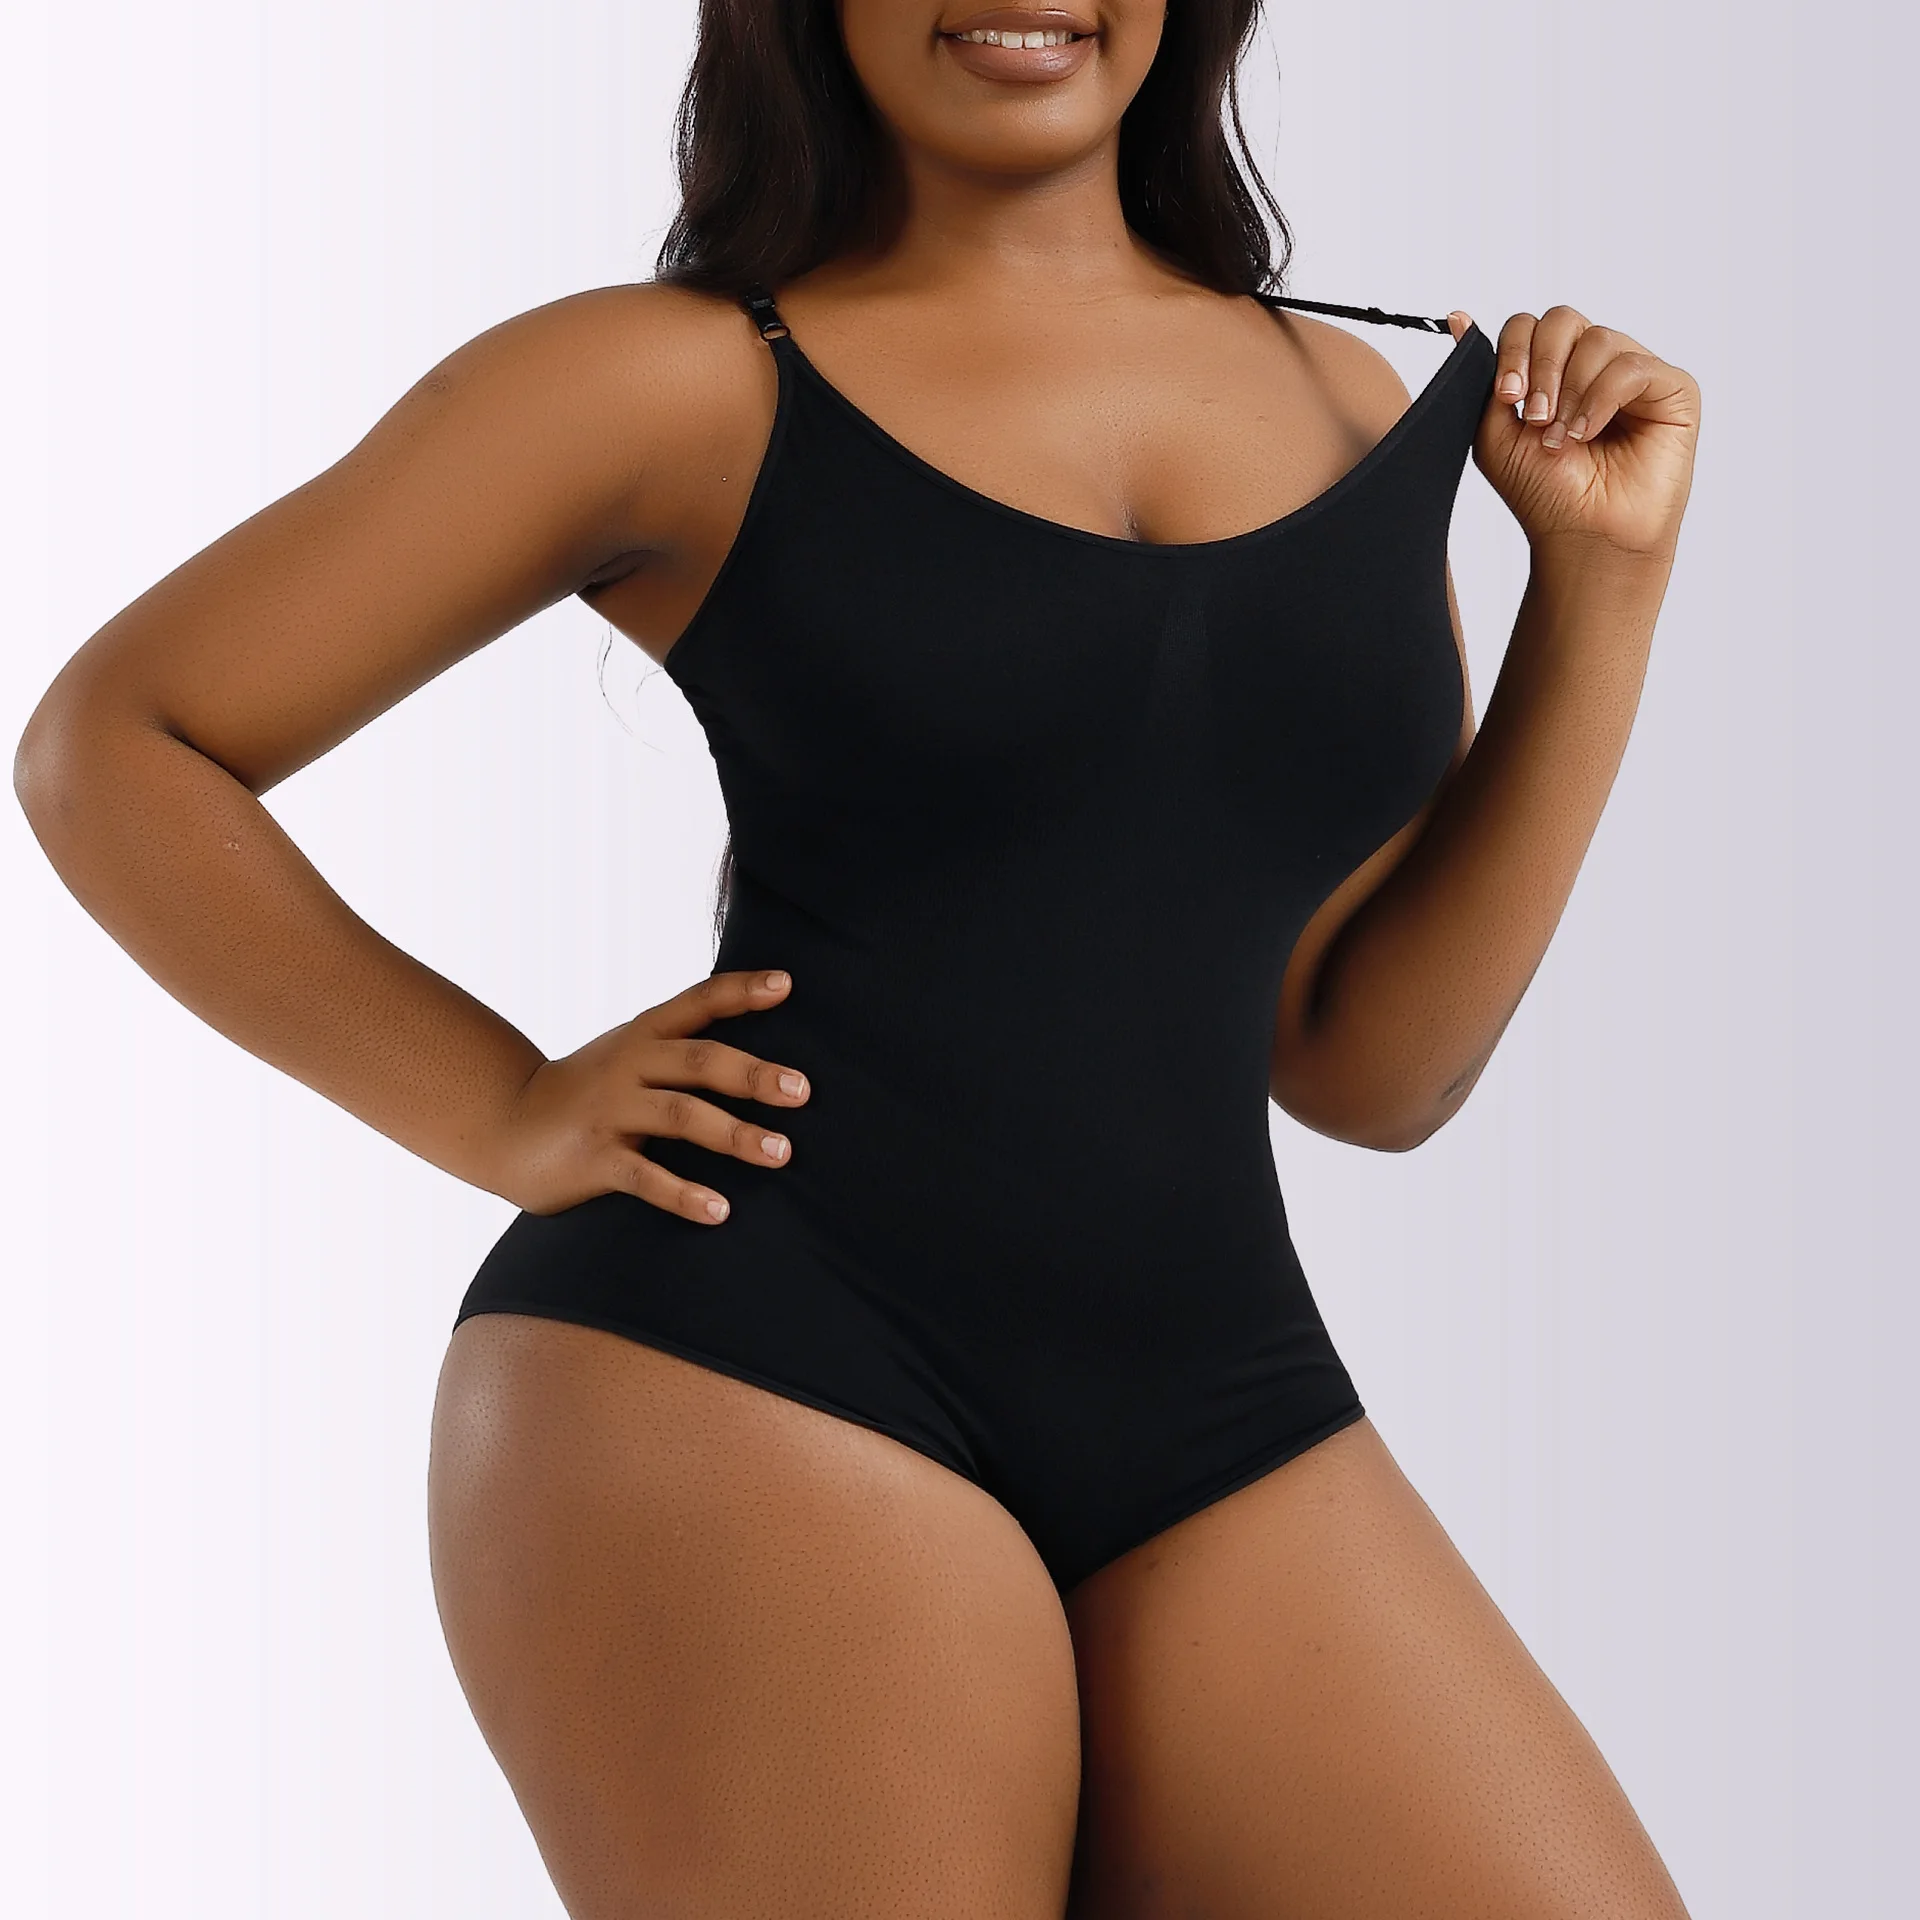 Camisole Shapewear Bodysuit Tighten Excess Fat Slim Waist Clothes for  Mother Wife Daughter Gifts XL Black 